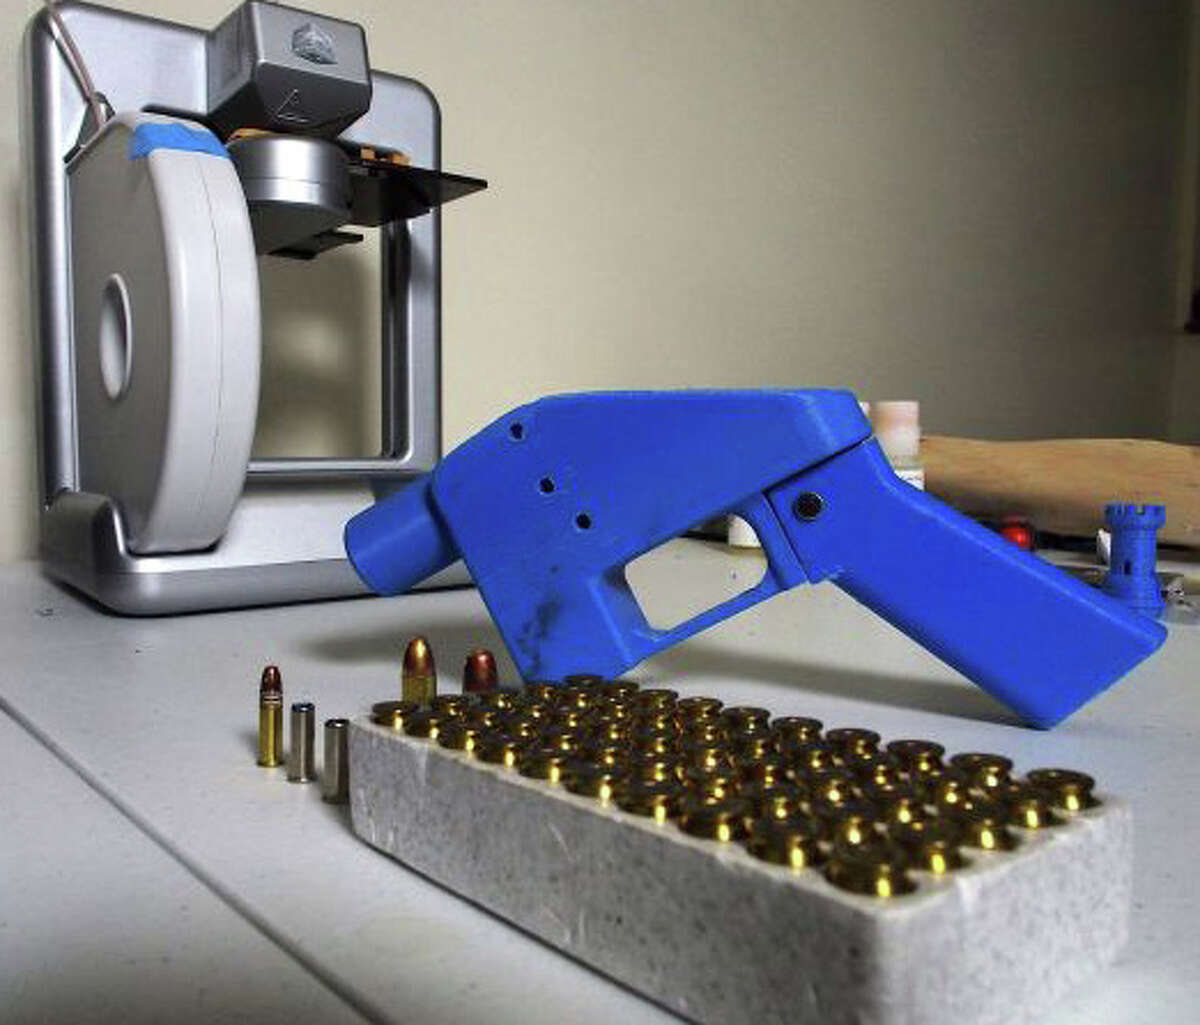 A Liberator pistol appears next to the 3D printer on which its components were made. The single-shot handgun is the first firearm that can be made entirely with plastic components forged with a 3D printer and computer-aided design (CAD) files downloaded from the Internet.